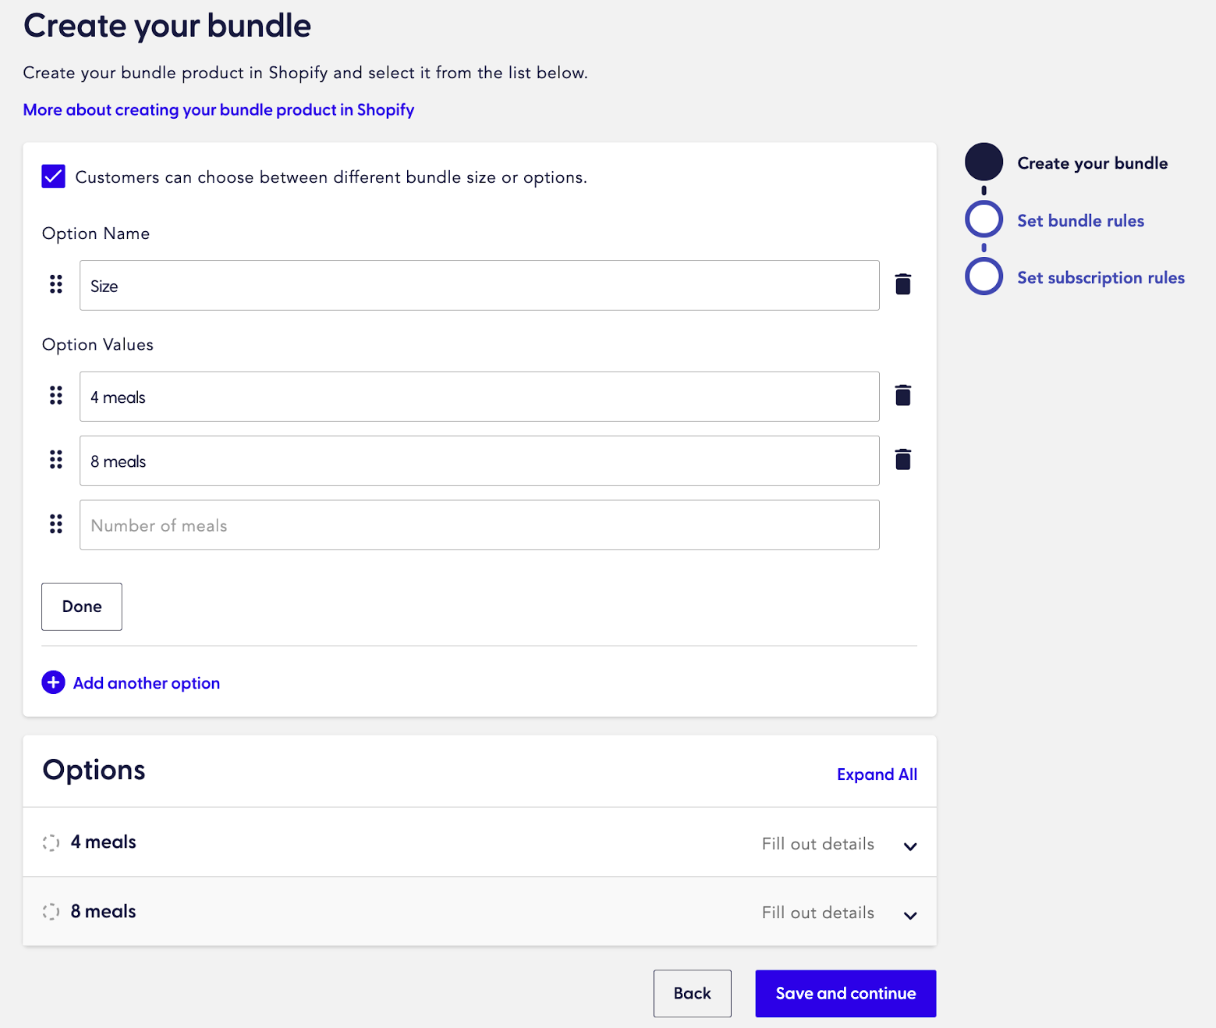 Configuring bundle options on the Create your bundle page